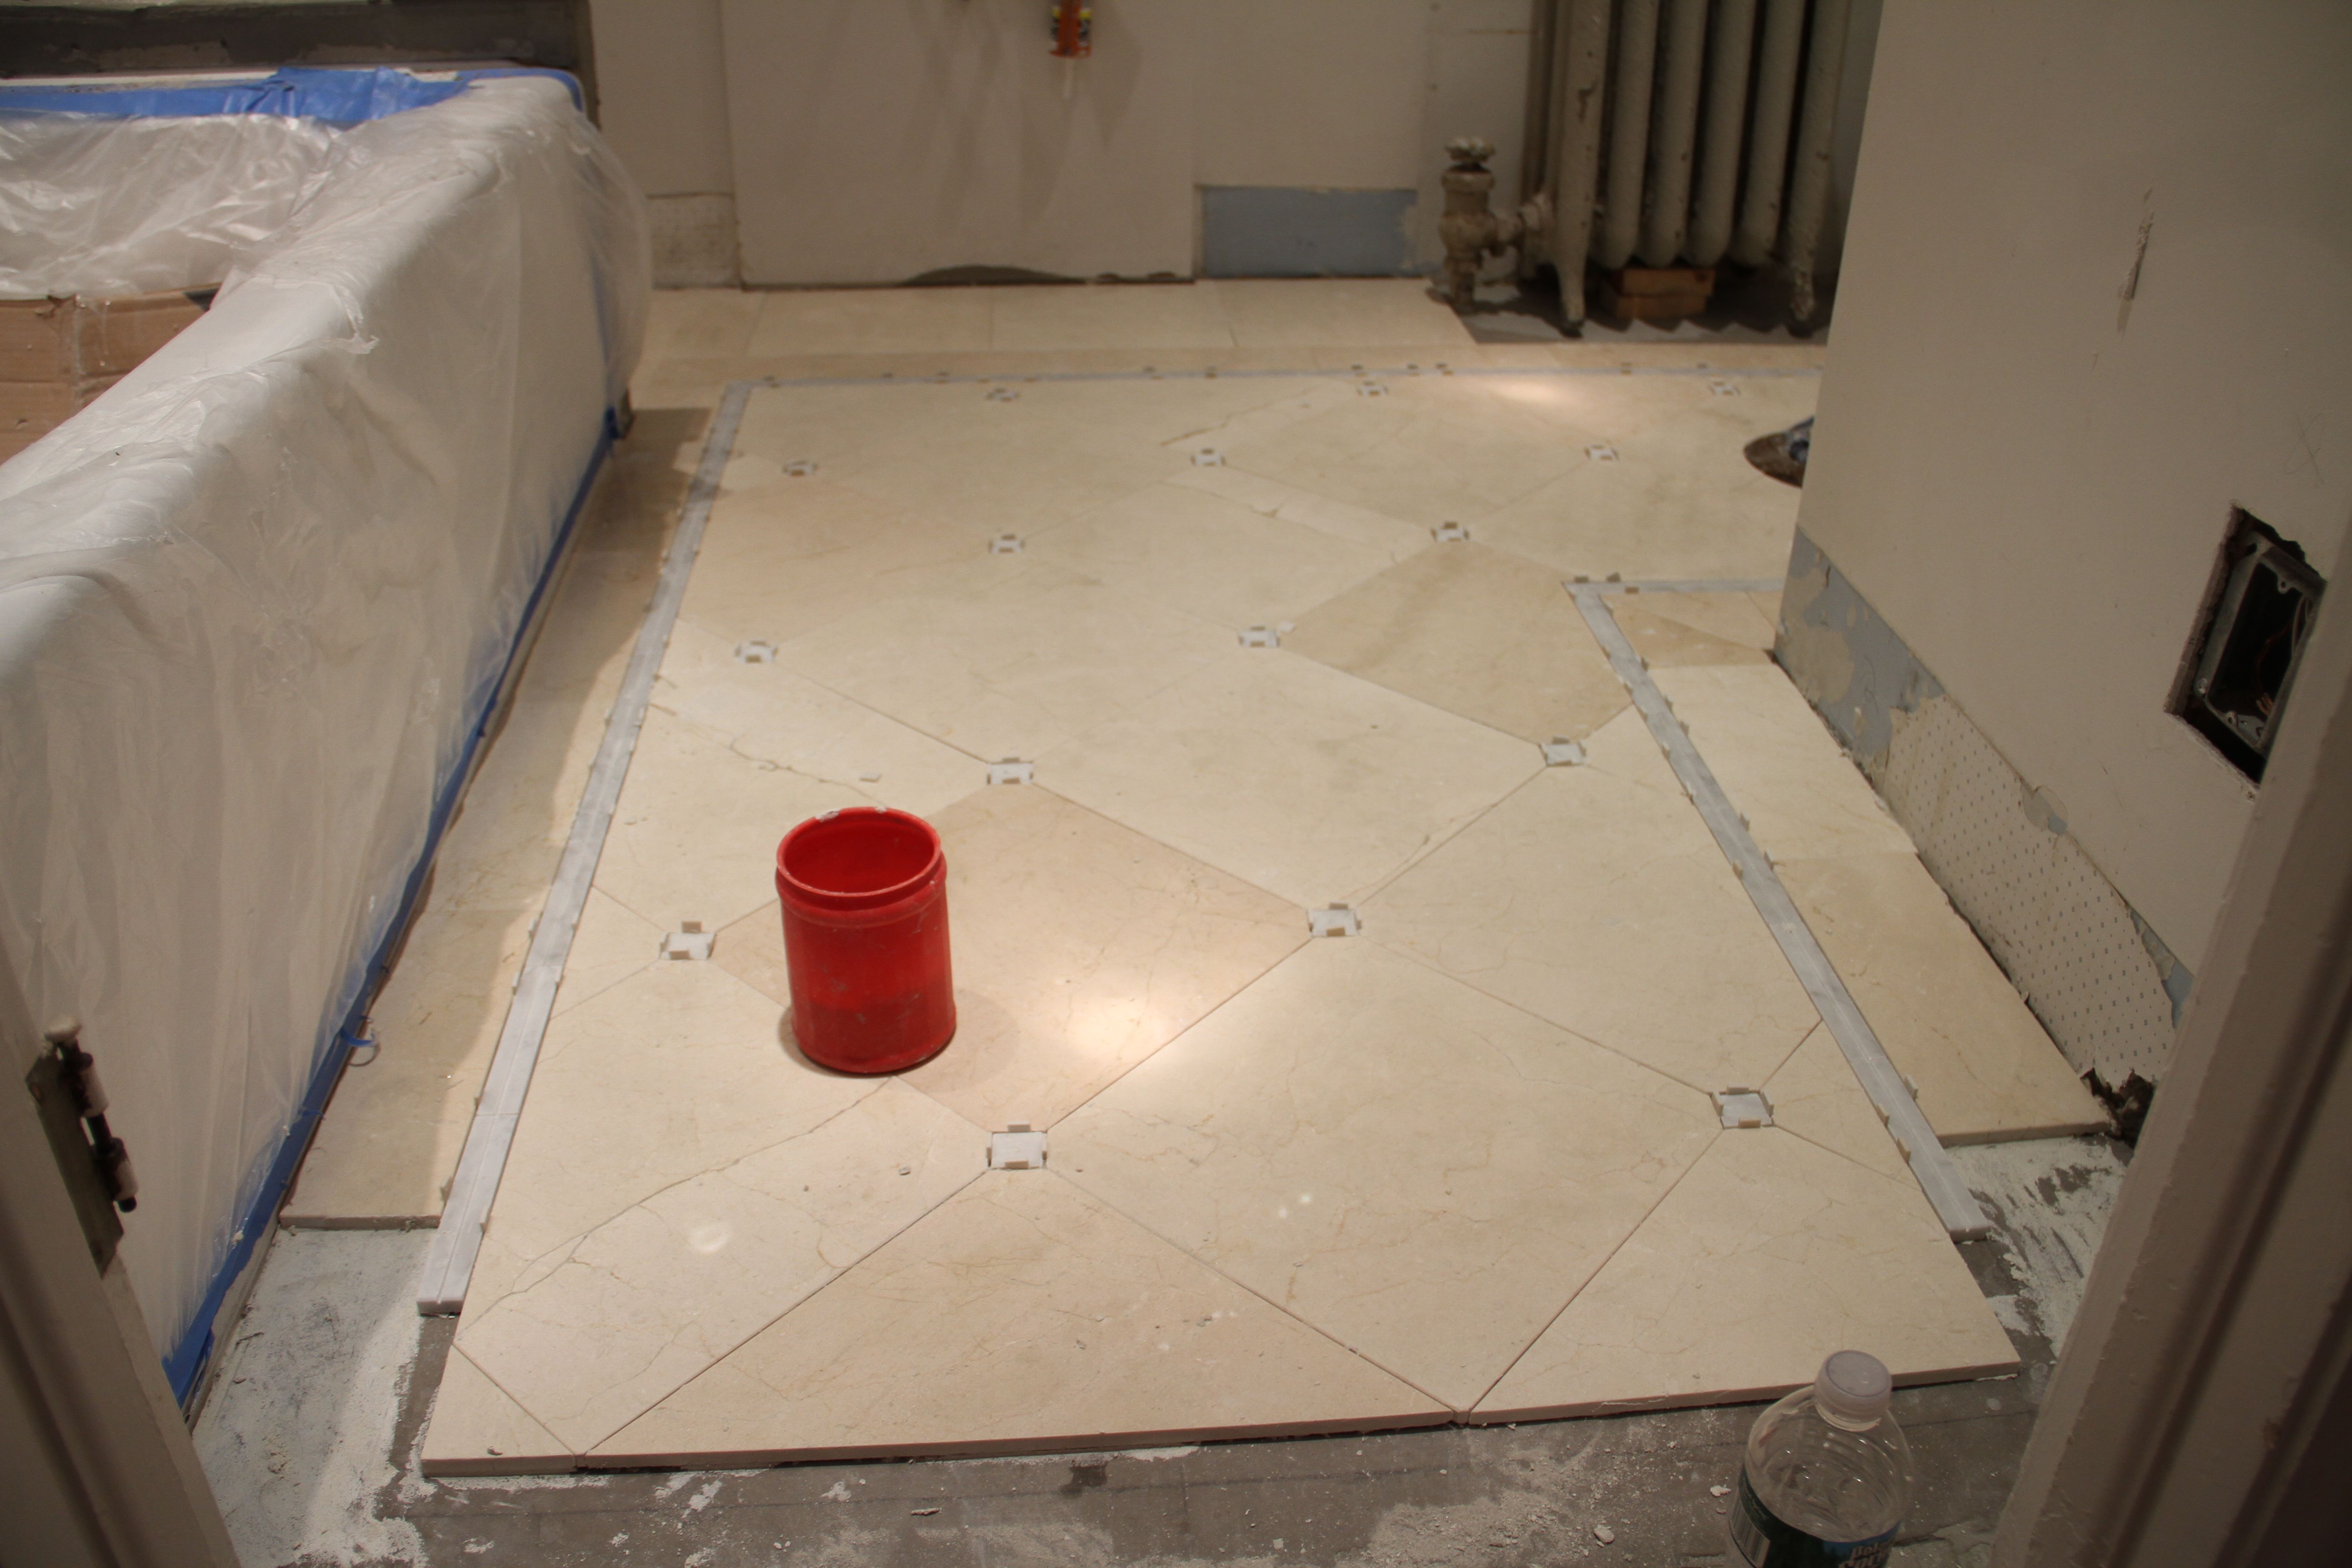 The last bits of the floor have to go in AFTER the threshold piece. But for now, we can protect the floor and walk on it. Woo hoo!